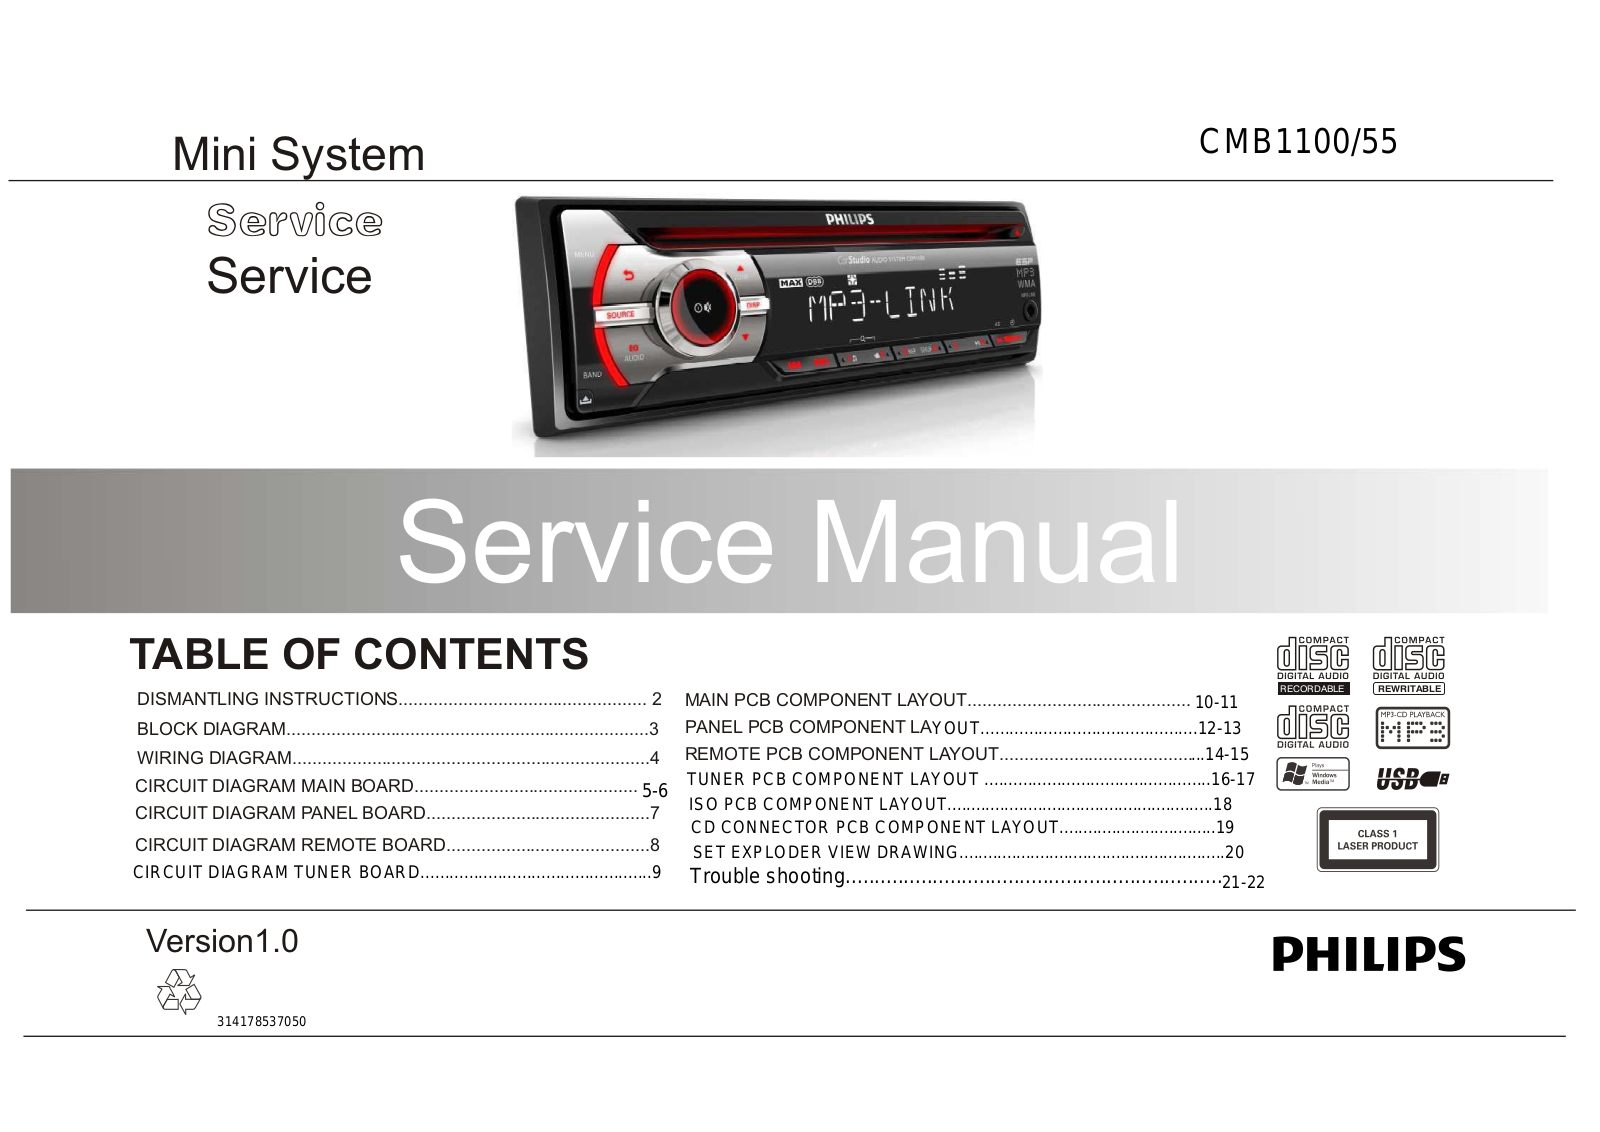 Philips CMB-1100 Service Manual